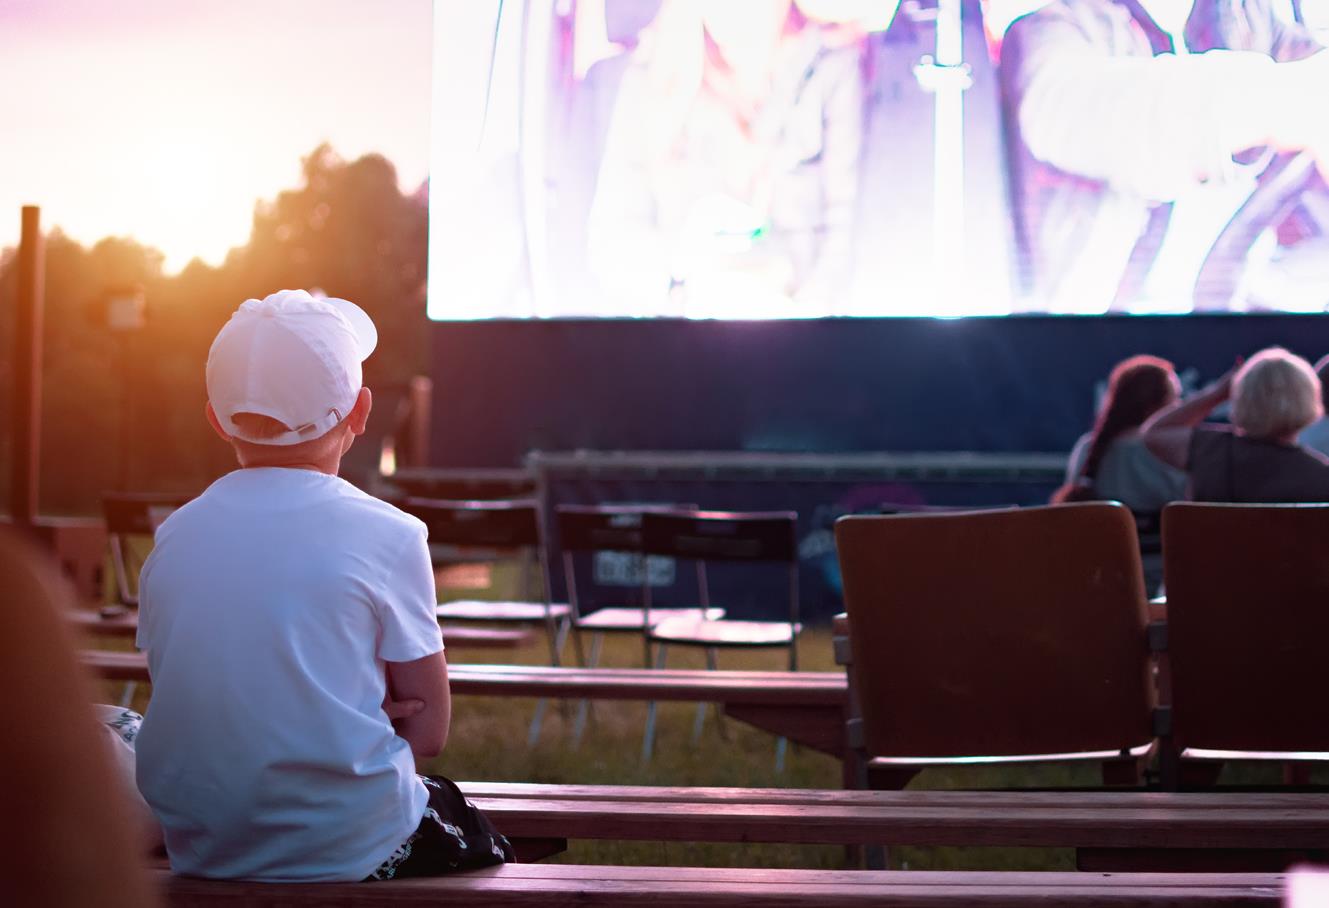 Movie Under the Stars at Tanger Outlet